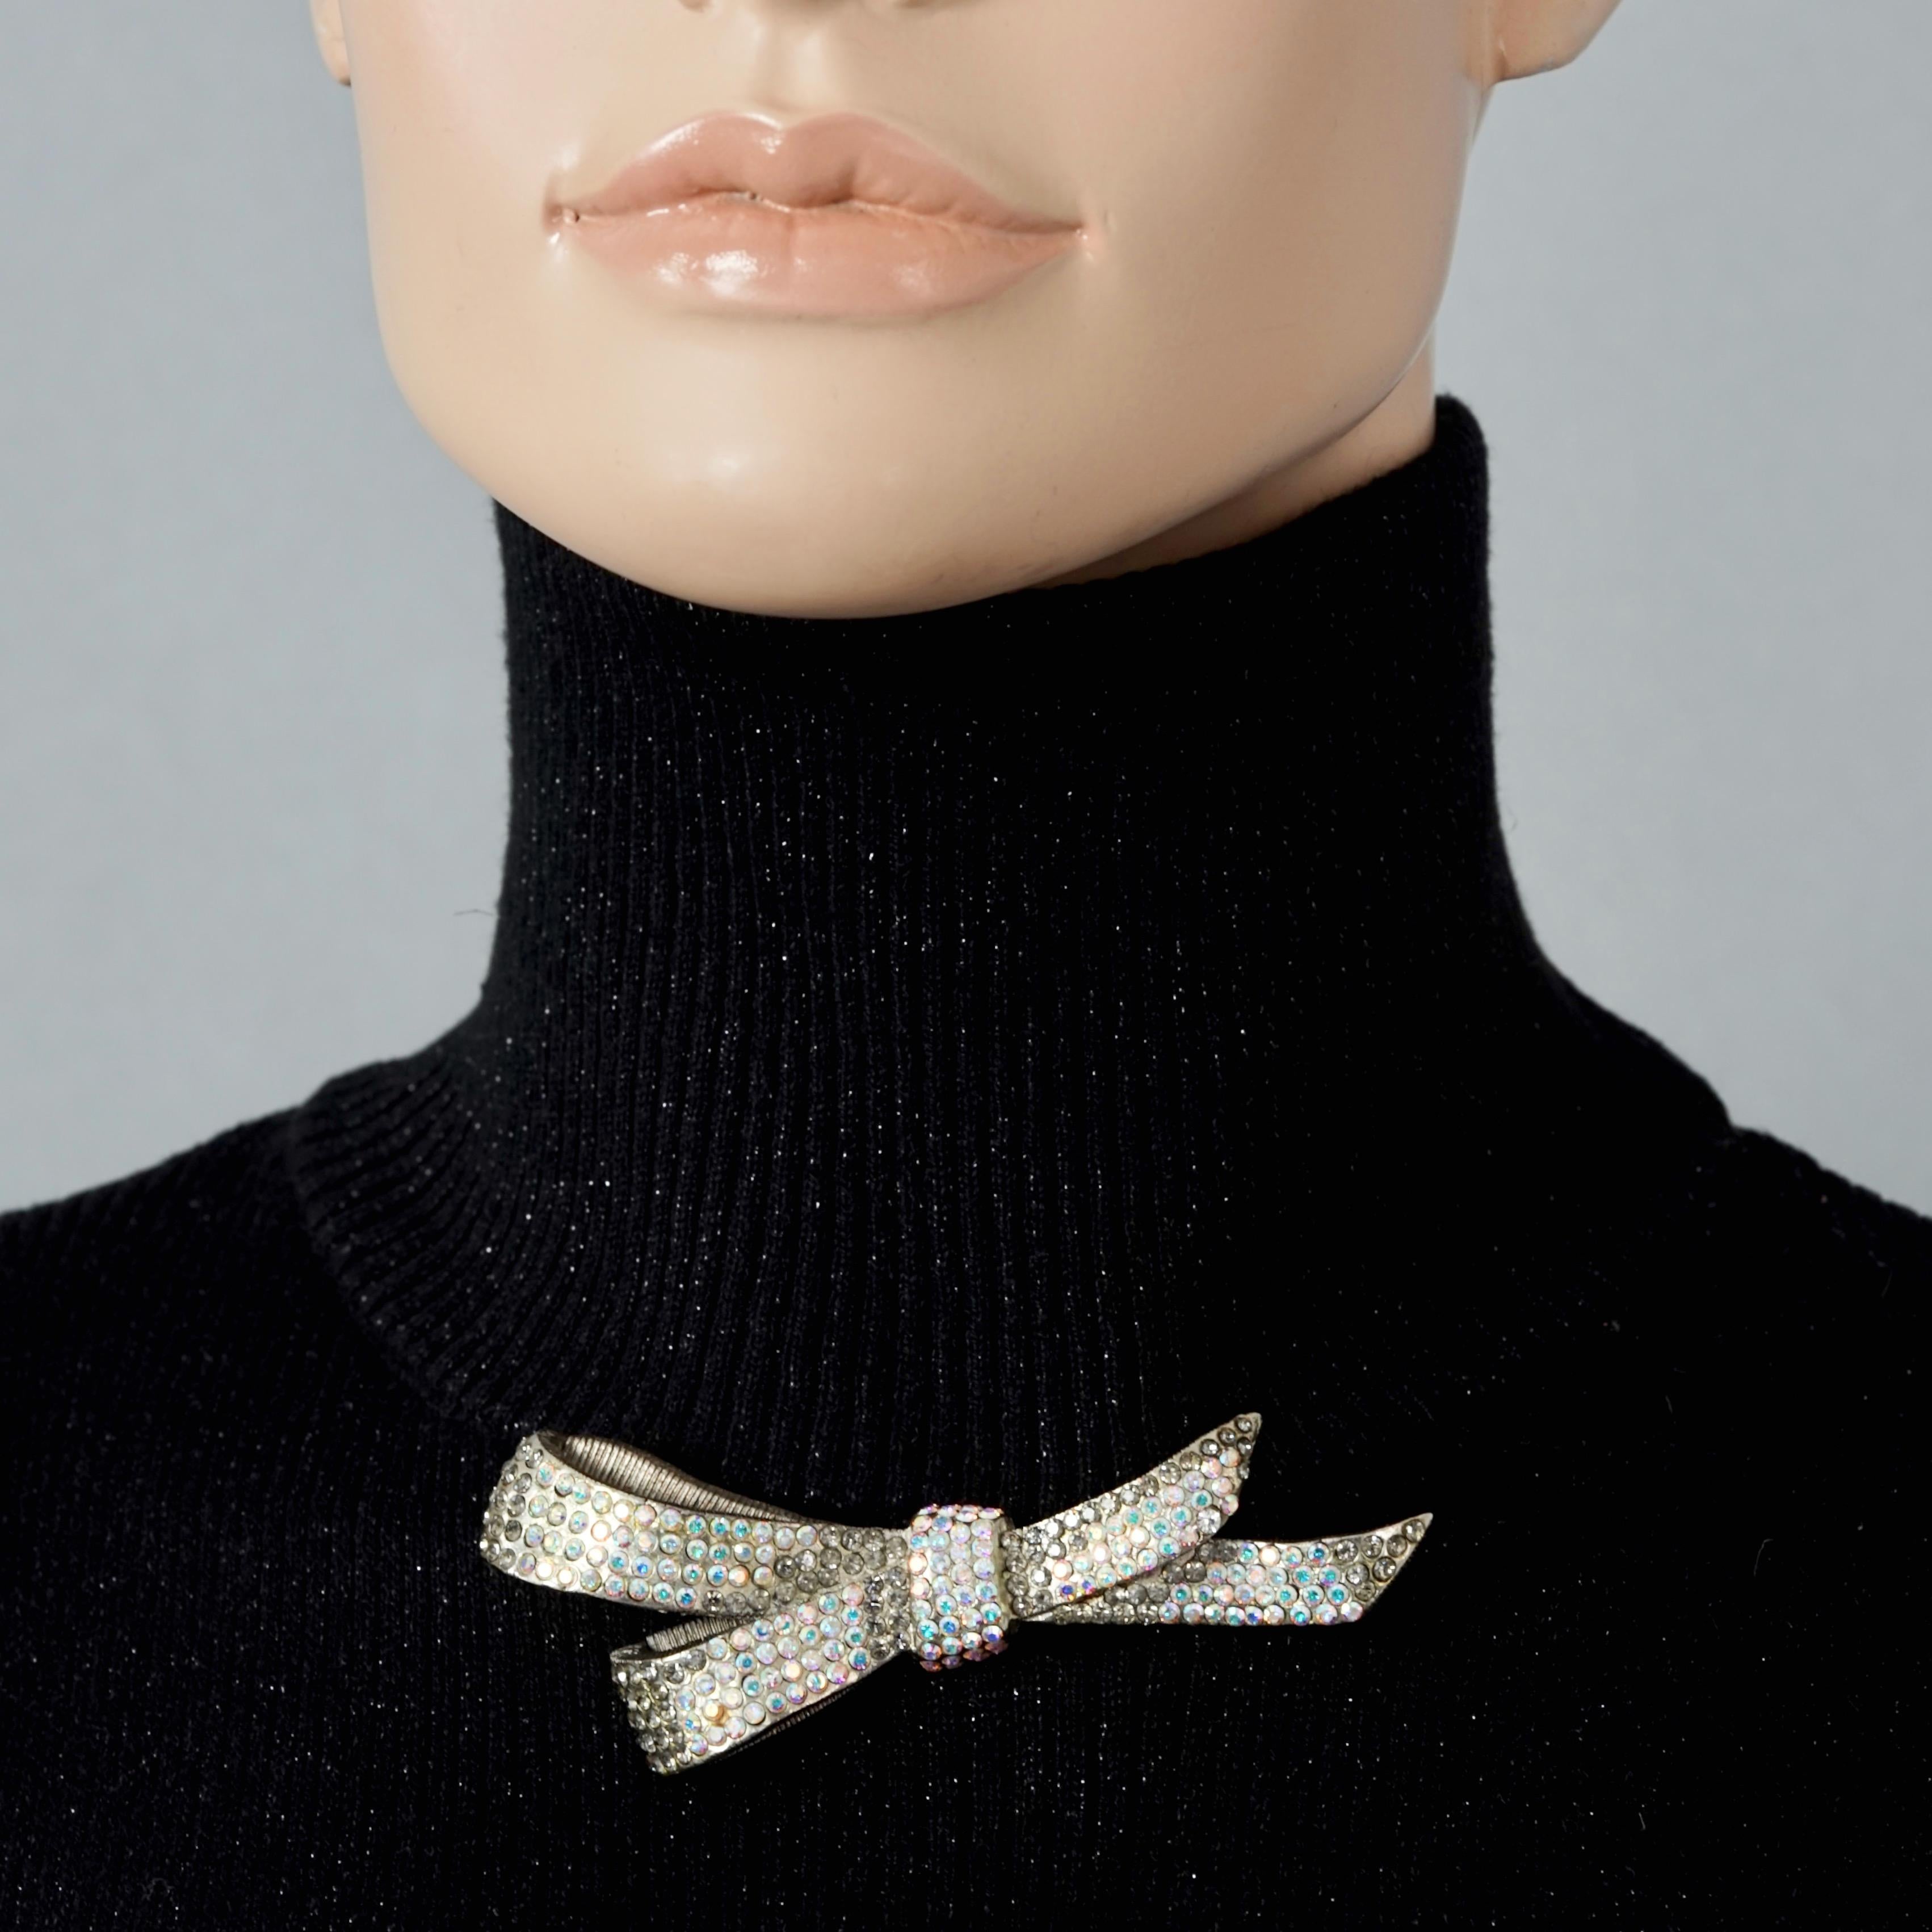 Vintage CHRISTIAN LACROIX Iridescent Jewelled Bow Patinated Brooch

Measurements:
Height: 1.53 inches (3.9 cm)
Length: 3.85 inches (9.8 cm)

Features:
- 100% Authentic CHRISTIAN LACROIX by Xavier Loubens.
- Bow brooch studded with clear and